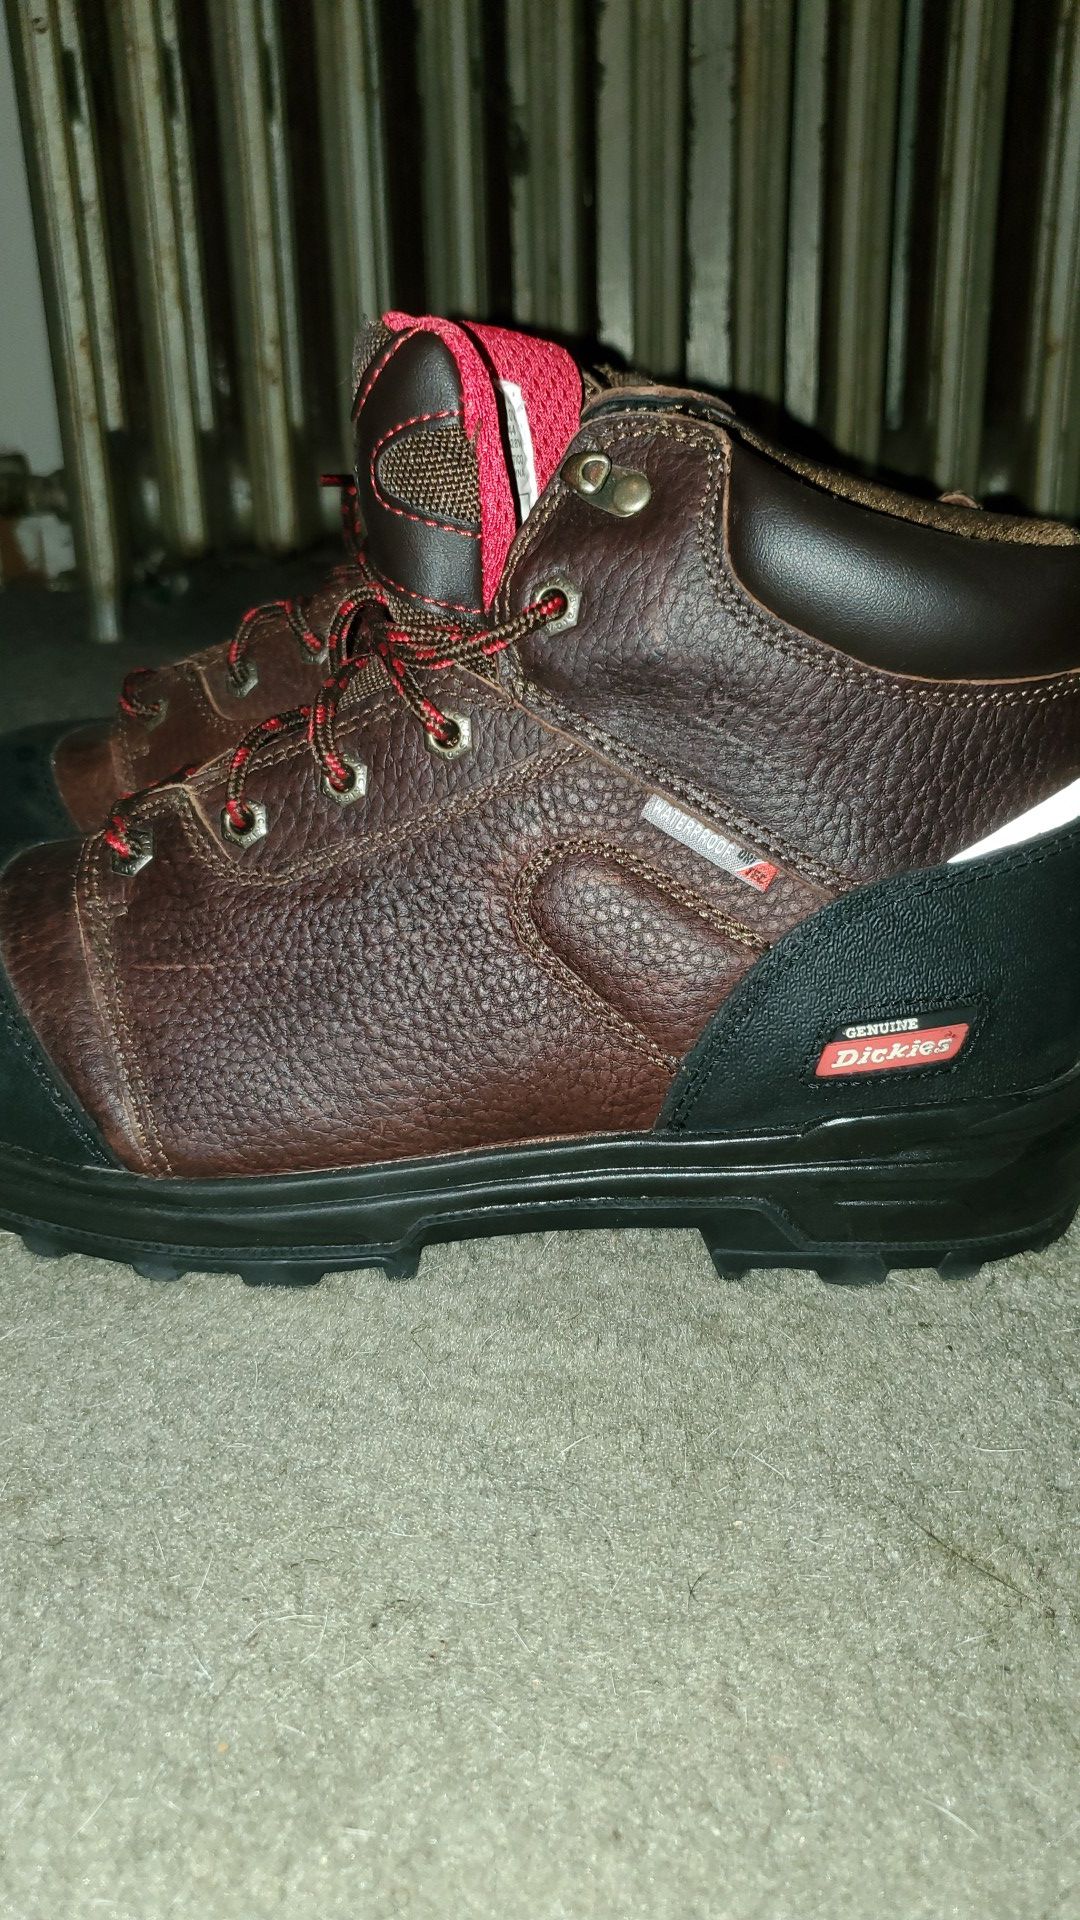 Dickies work boots